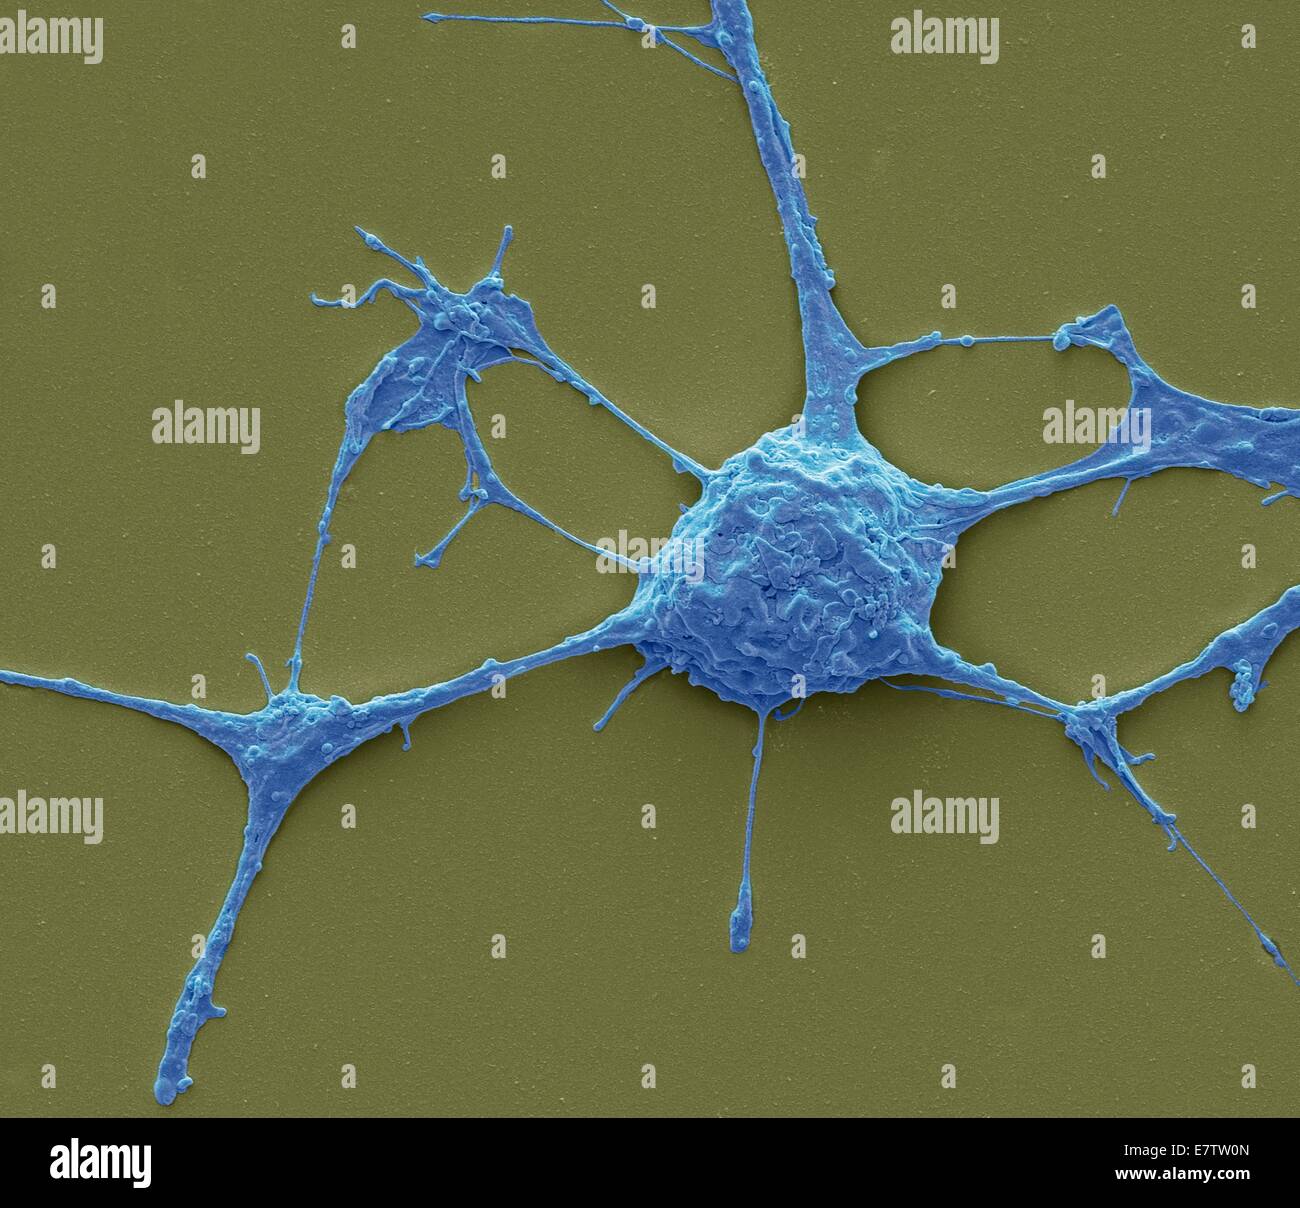 Neurone. Scanning electron micrograph (SEM) of a PC12 neurone in culture.The PC12 cell line, developed from a pheochromocytoma tumor of the rat adrenal medulla, has become a premiere model for the study of neuronal differentiation. When treated in culture Stock Photo